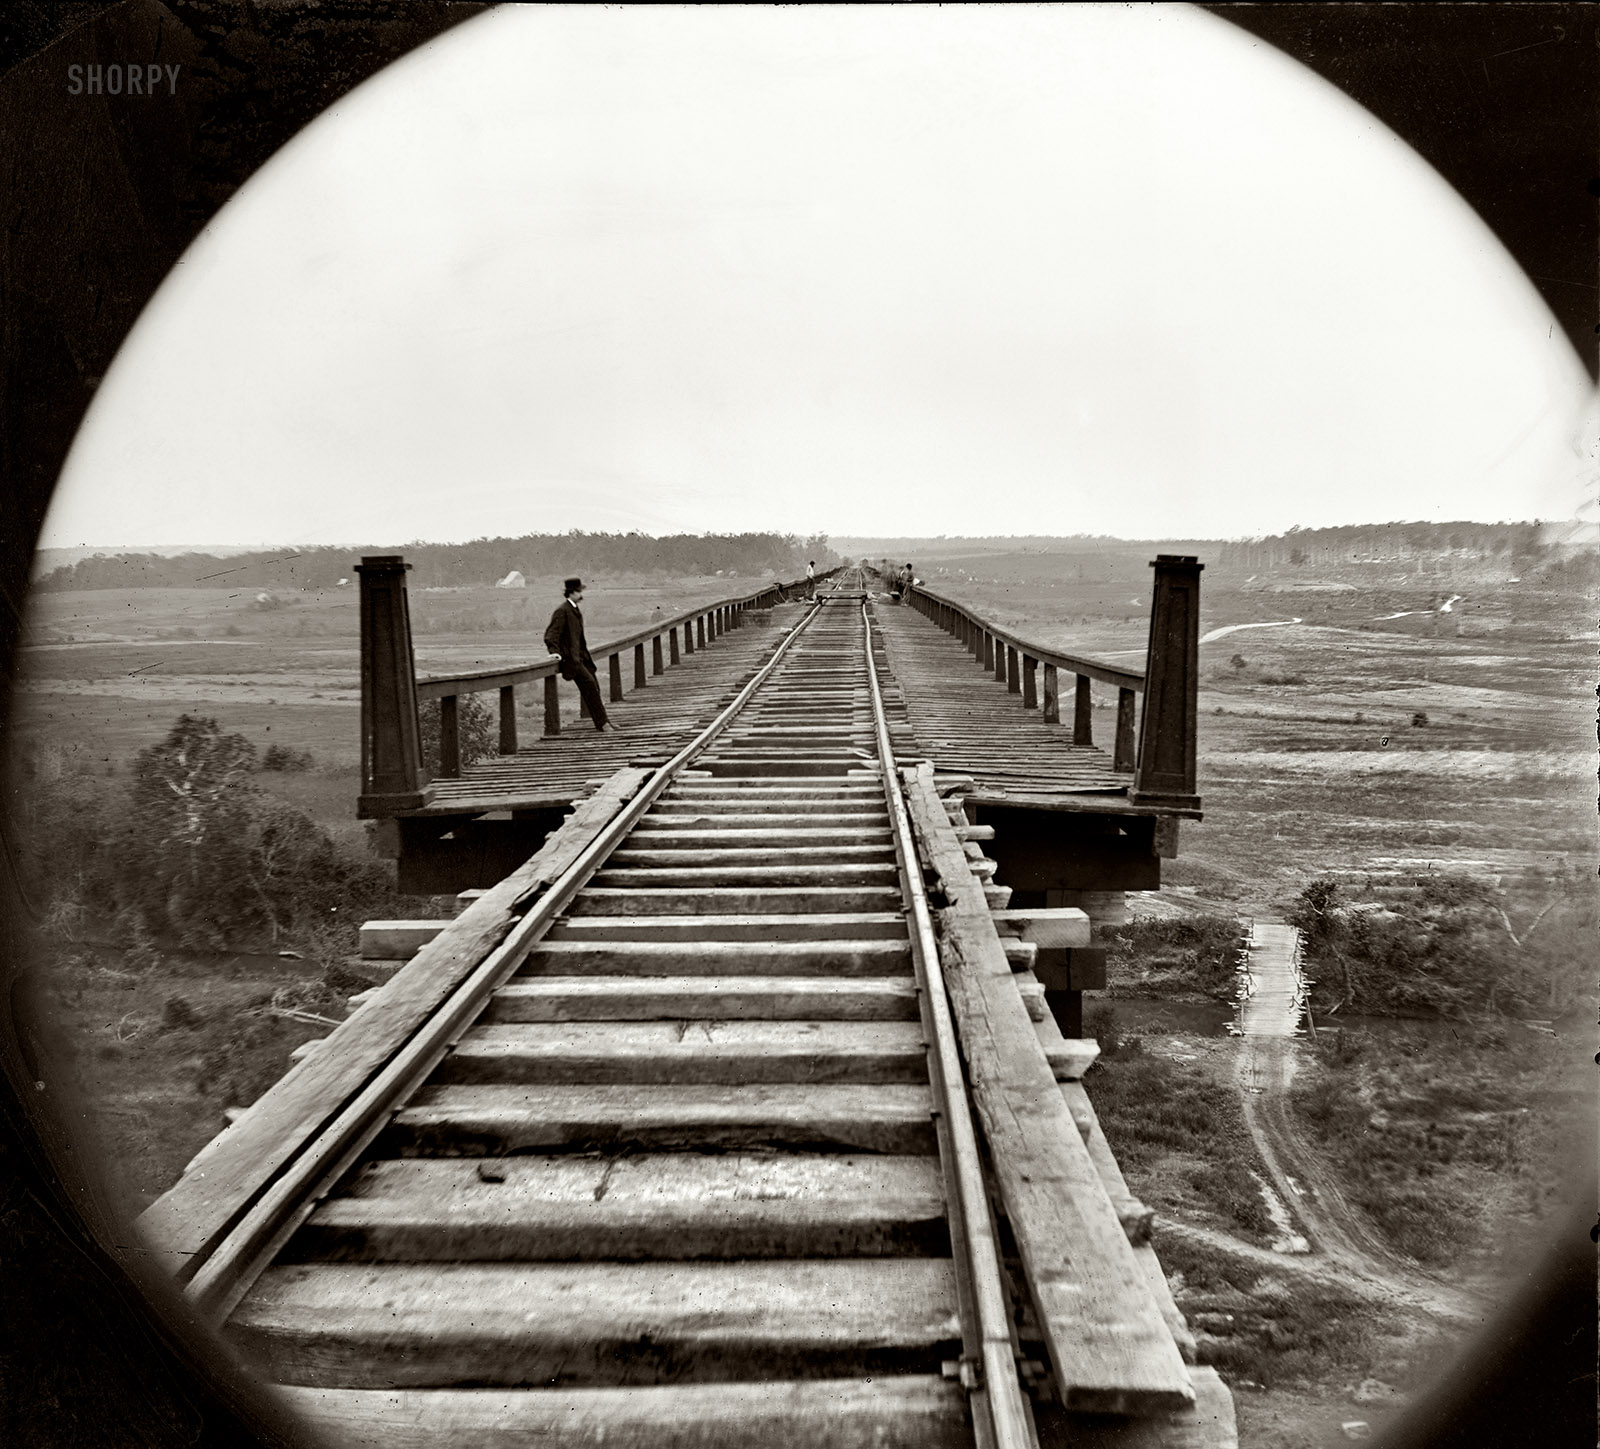 April 1865. "Farmville, Virginia, vicinity. High bridge of the South Side Railroad across the Appomattox." From photographs of the main Eastern theater of war, the siege of Petersburg, June 1864-April 1865. Wet collodion glass plate negative, left half of stereograph pair, by Timothy H. O'Sullivan; from Civil War photographs compiled by Hirst Milhollen and Donald Mugridge. View full size.